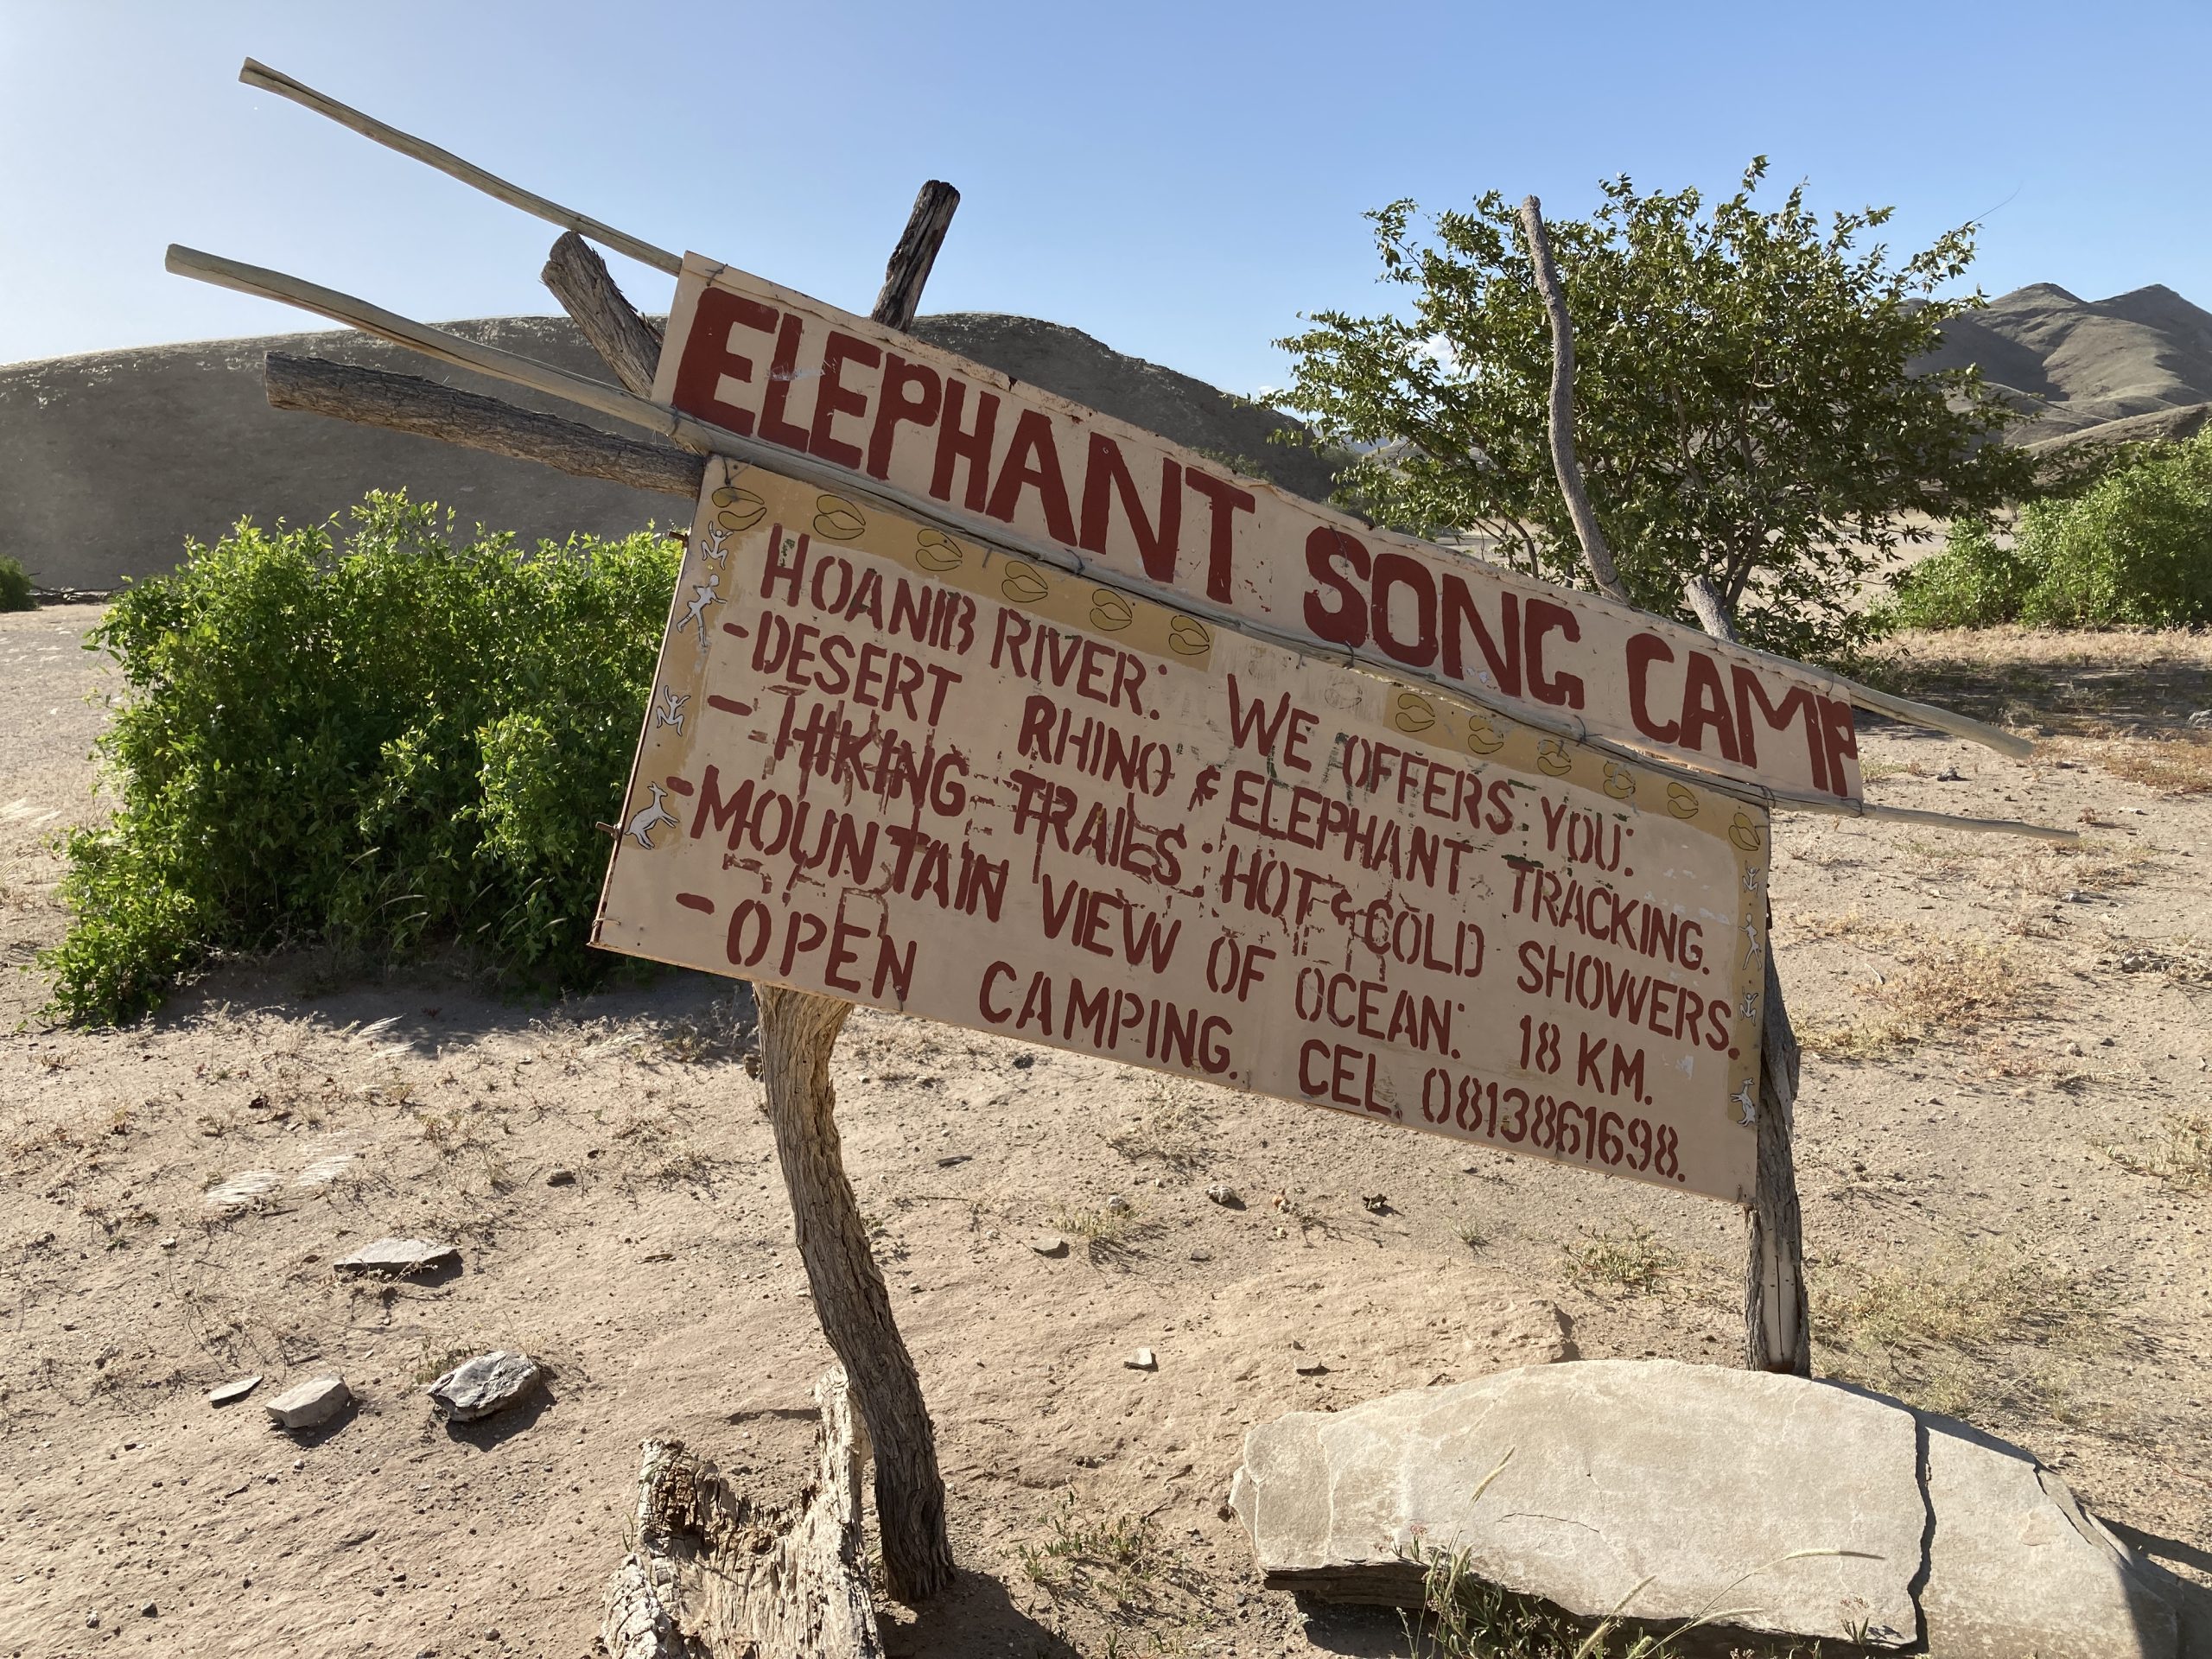 Elephant Song Camp